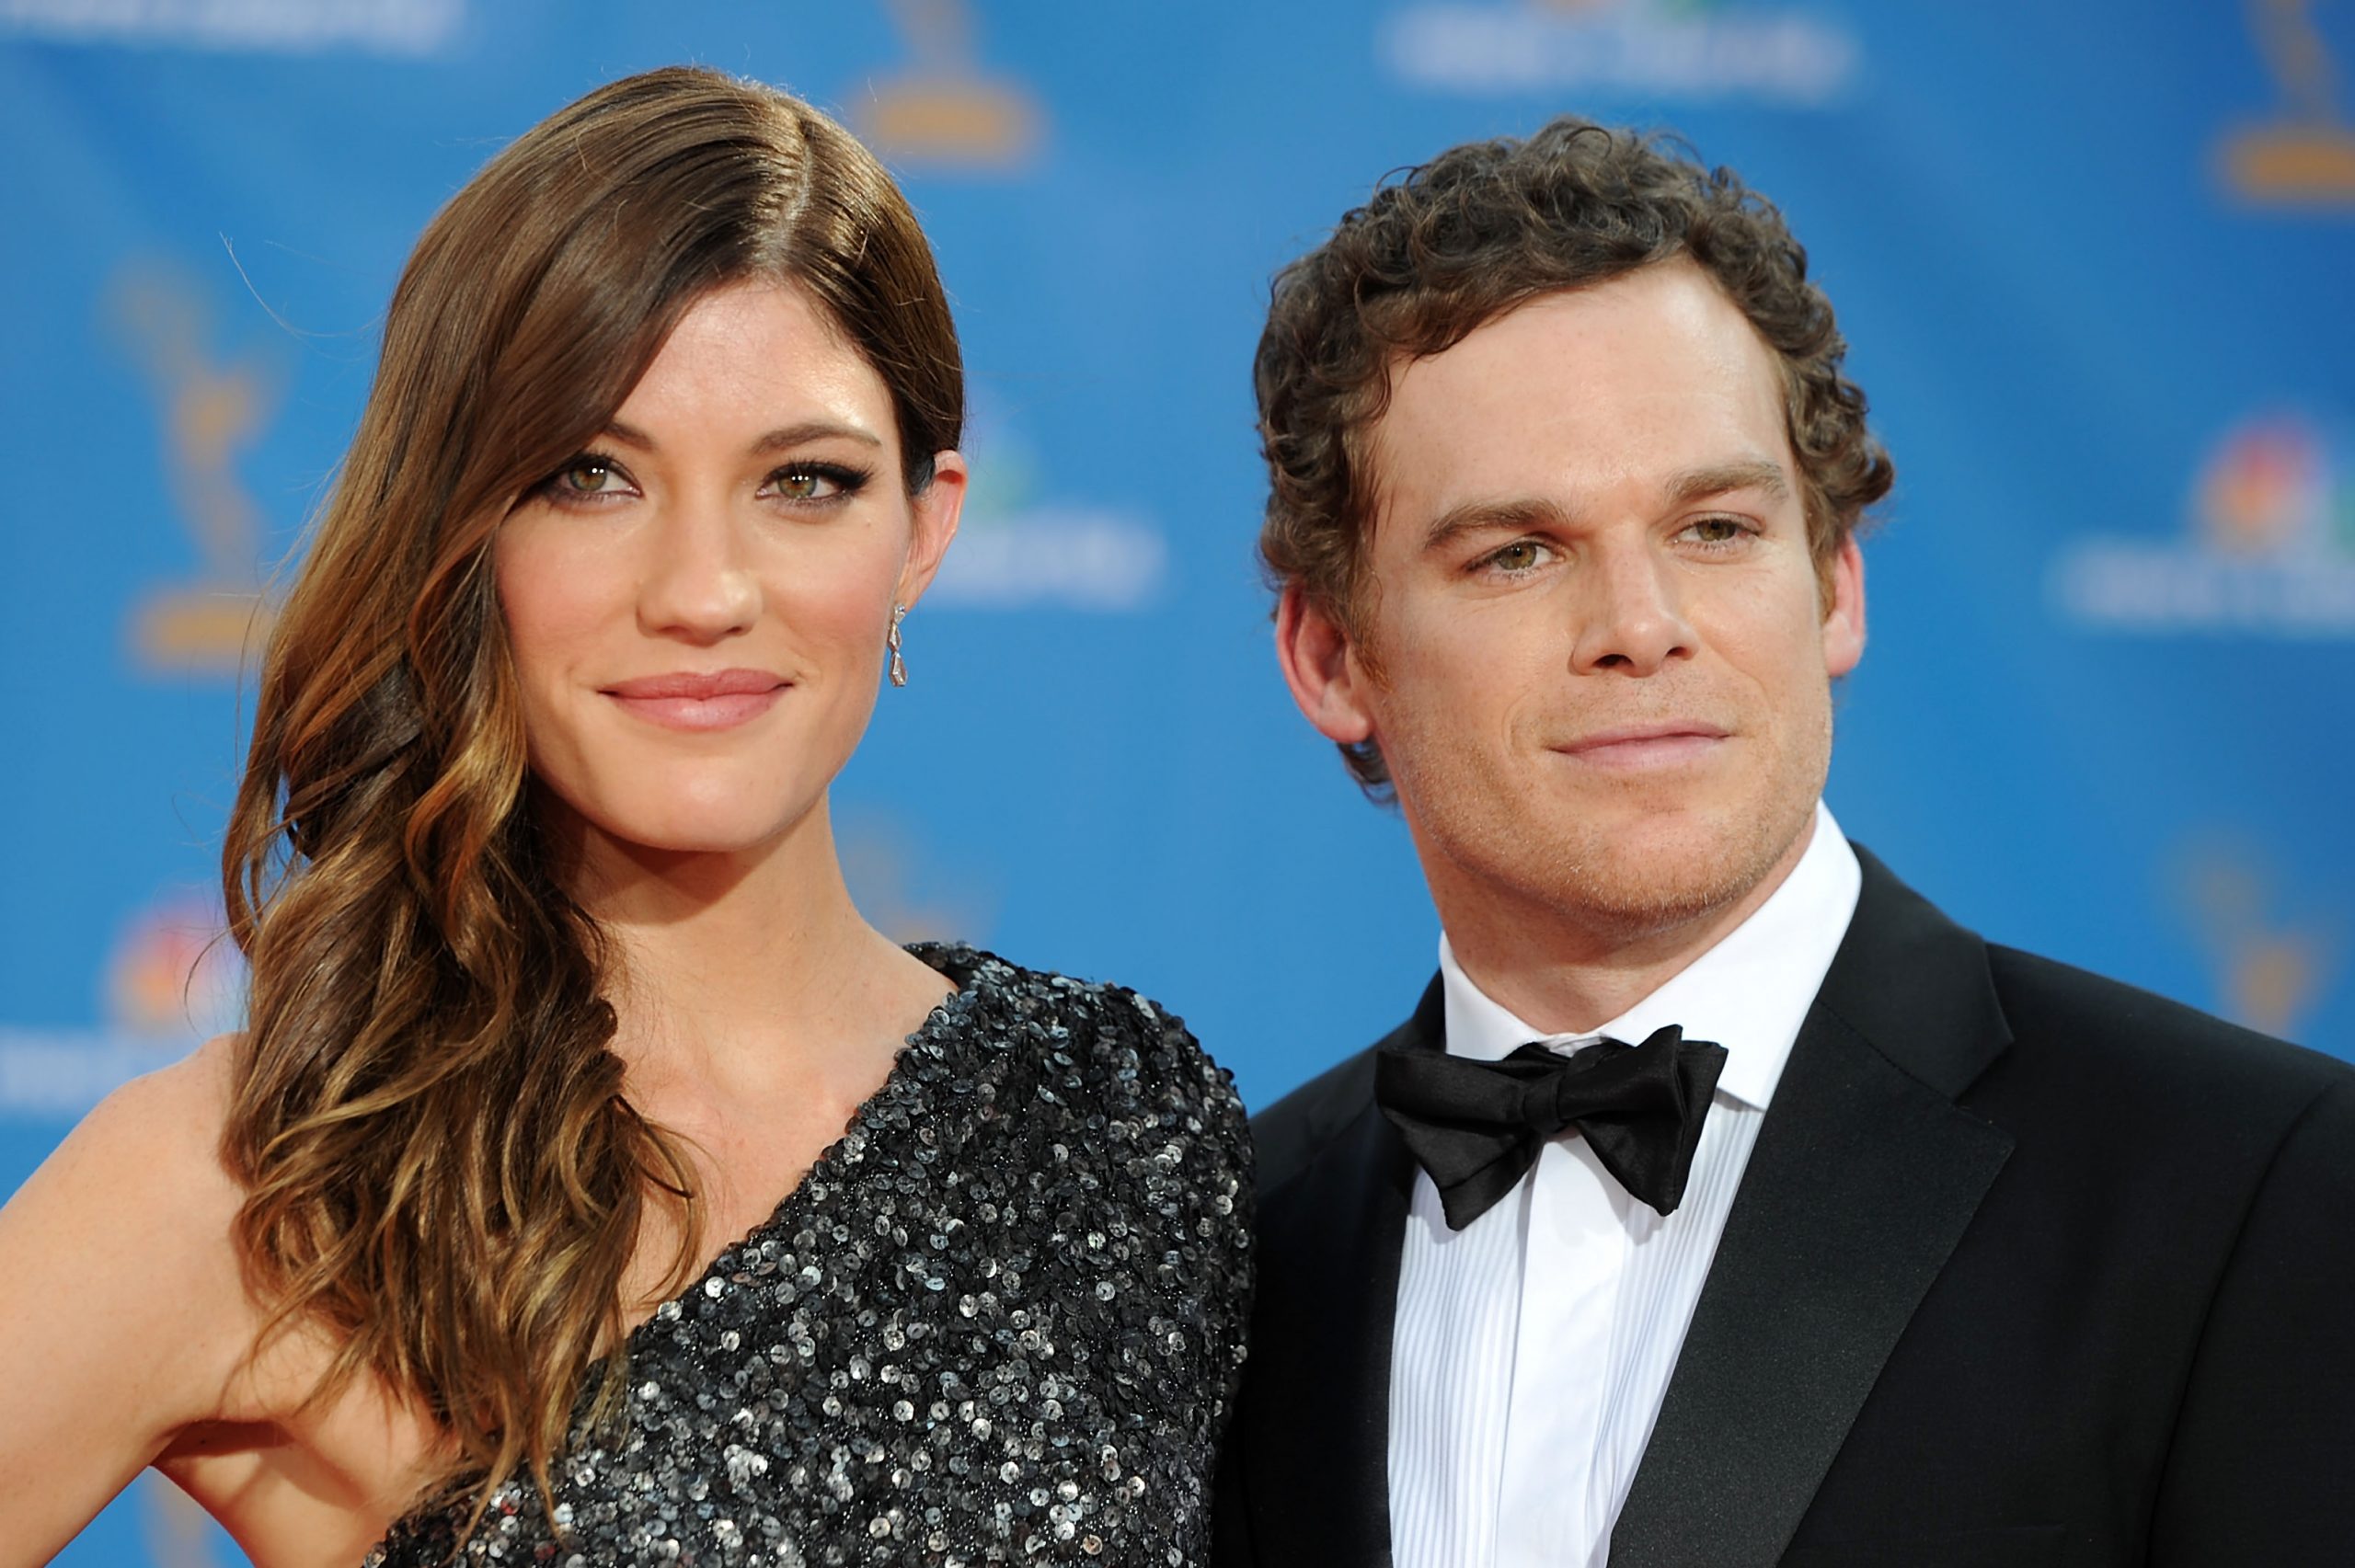 Jennifer Carpenter and Michael C. Hall pose for a photo. Carpenter wears a sequined one-shoulder dress and Hall wears a tux with a bow tie.